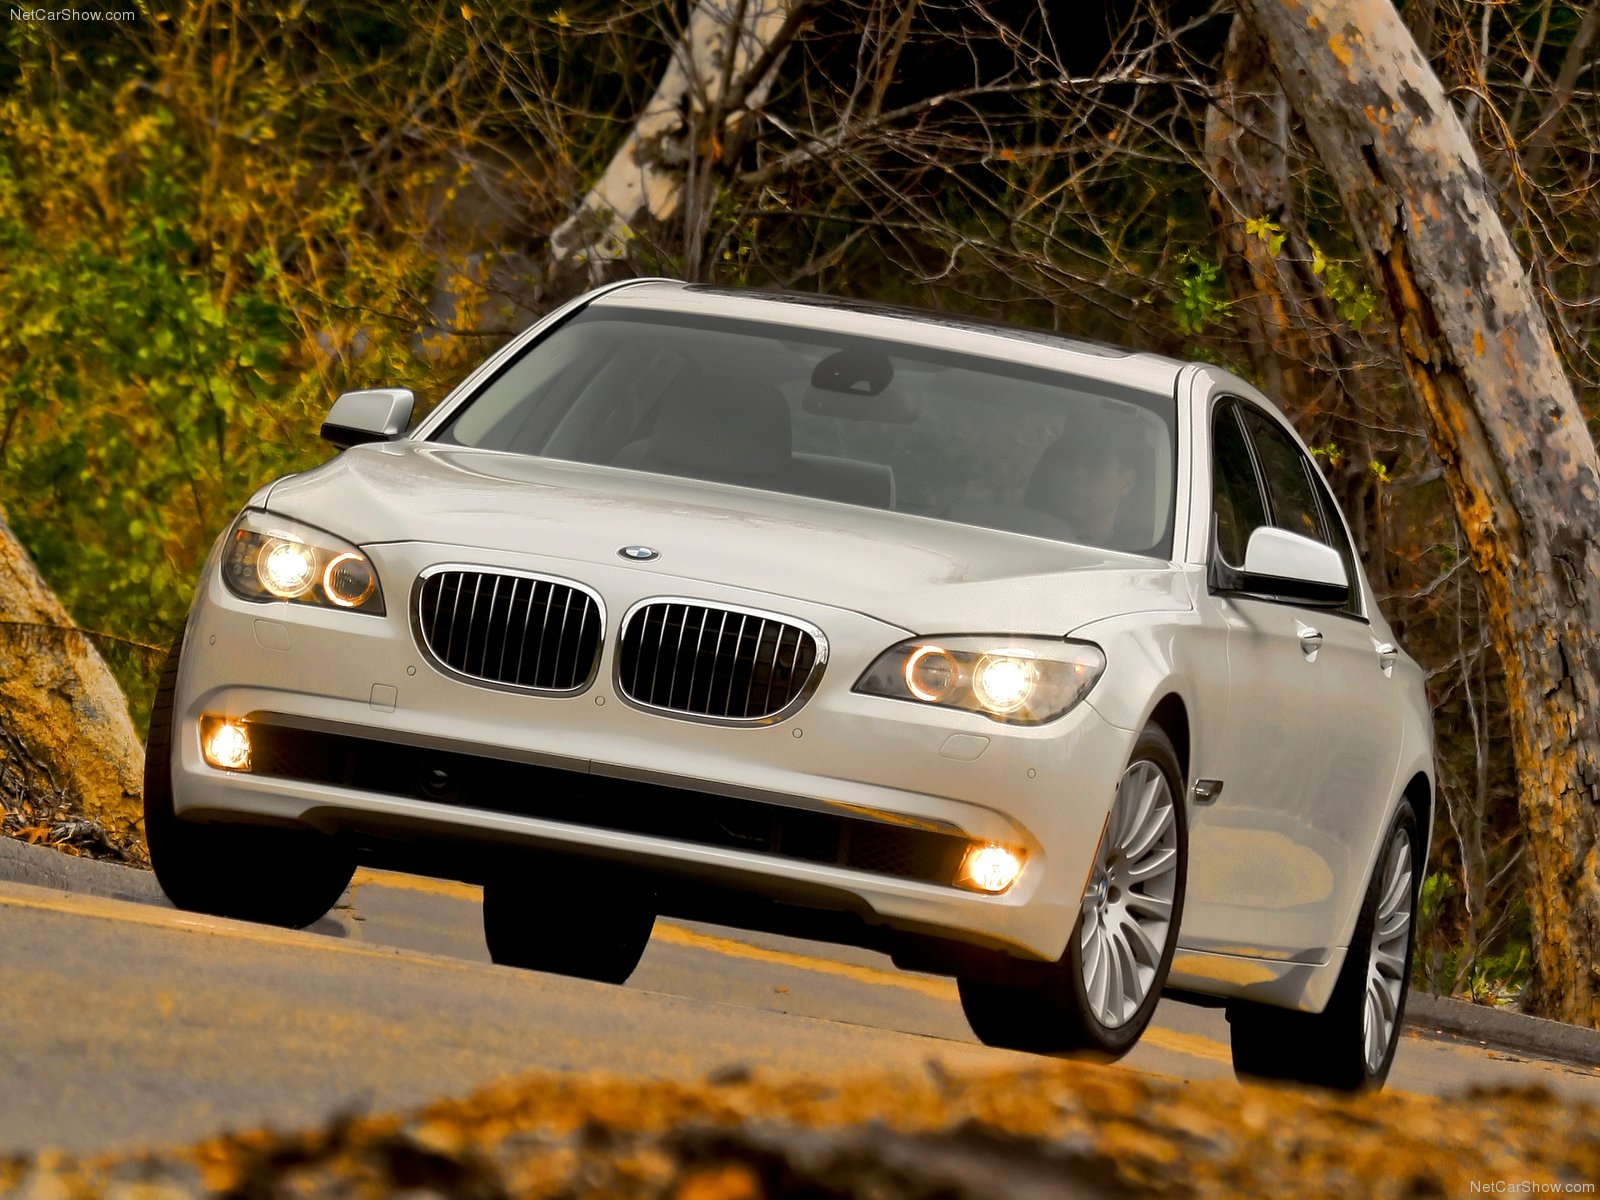 BMW 7-series F01 F02 photos - PhotoGallery with 120 pics| CarsBase.com